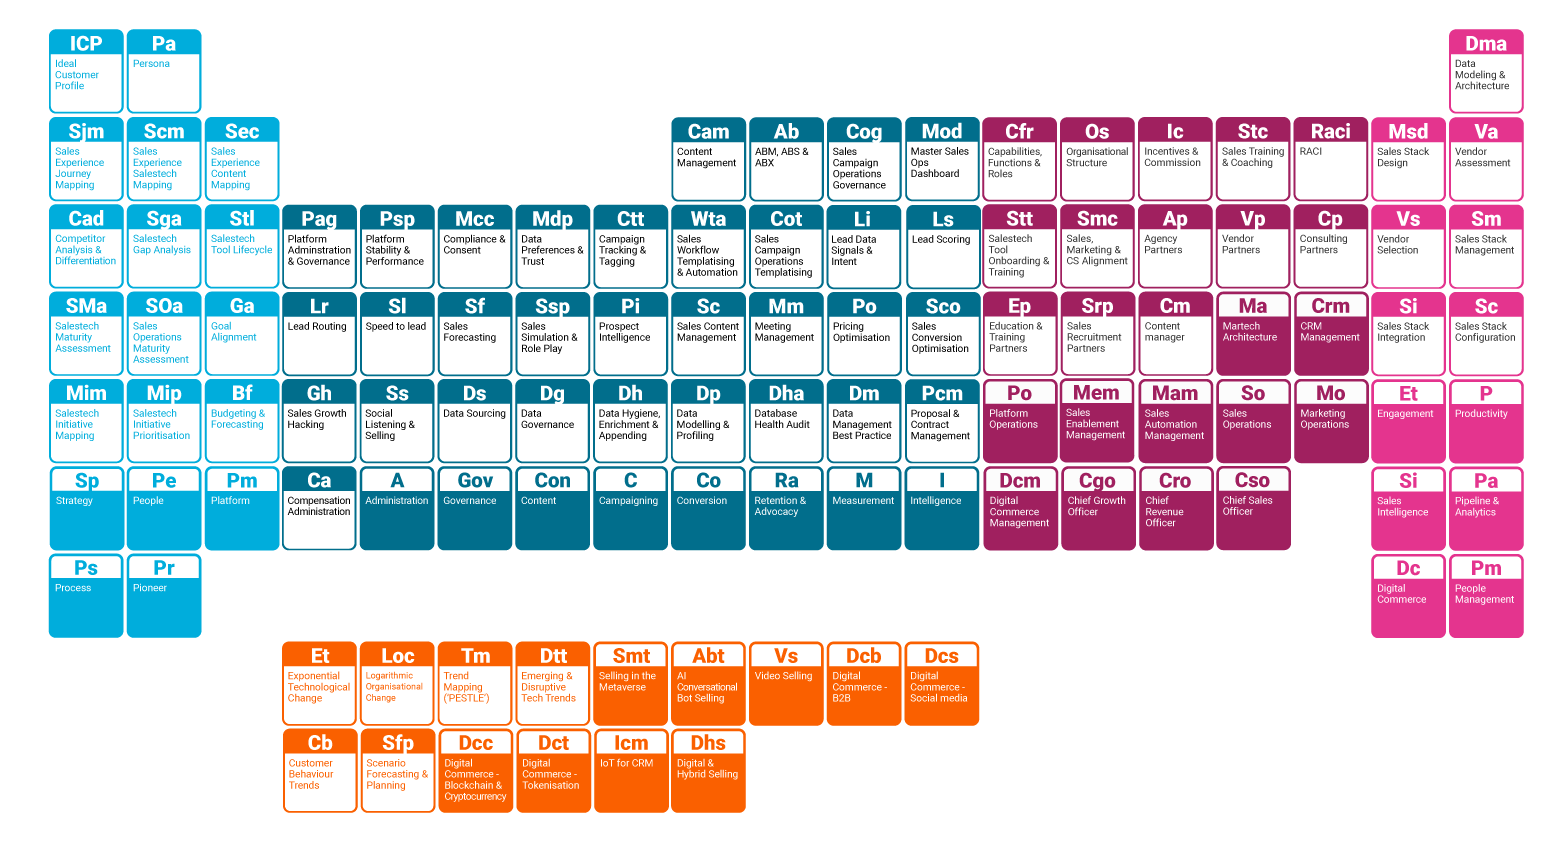 Sales-Enablement-Periodic-Table